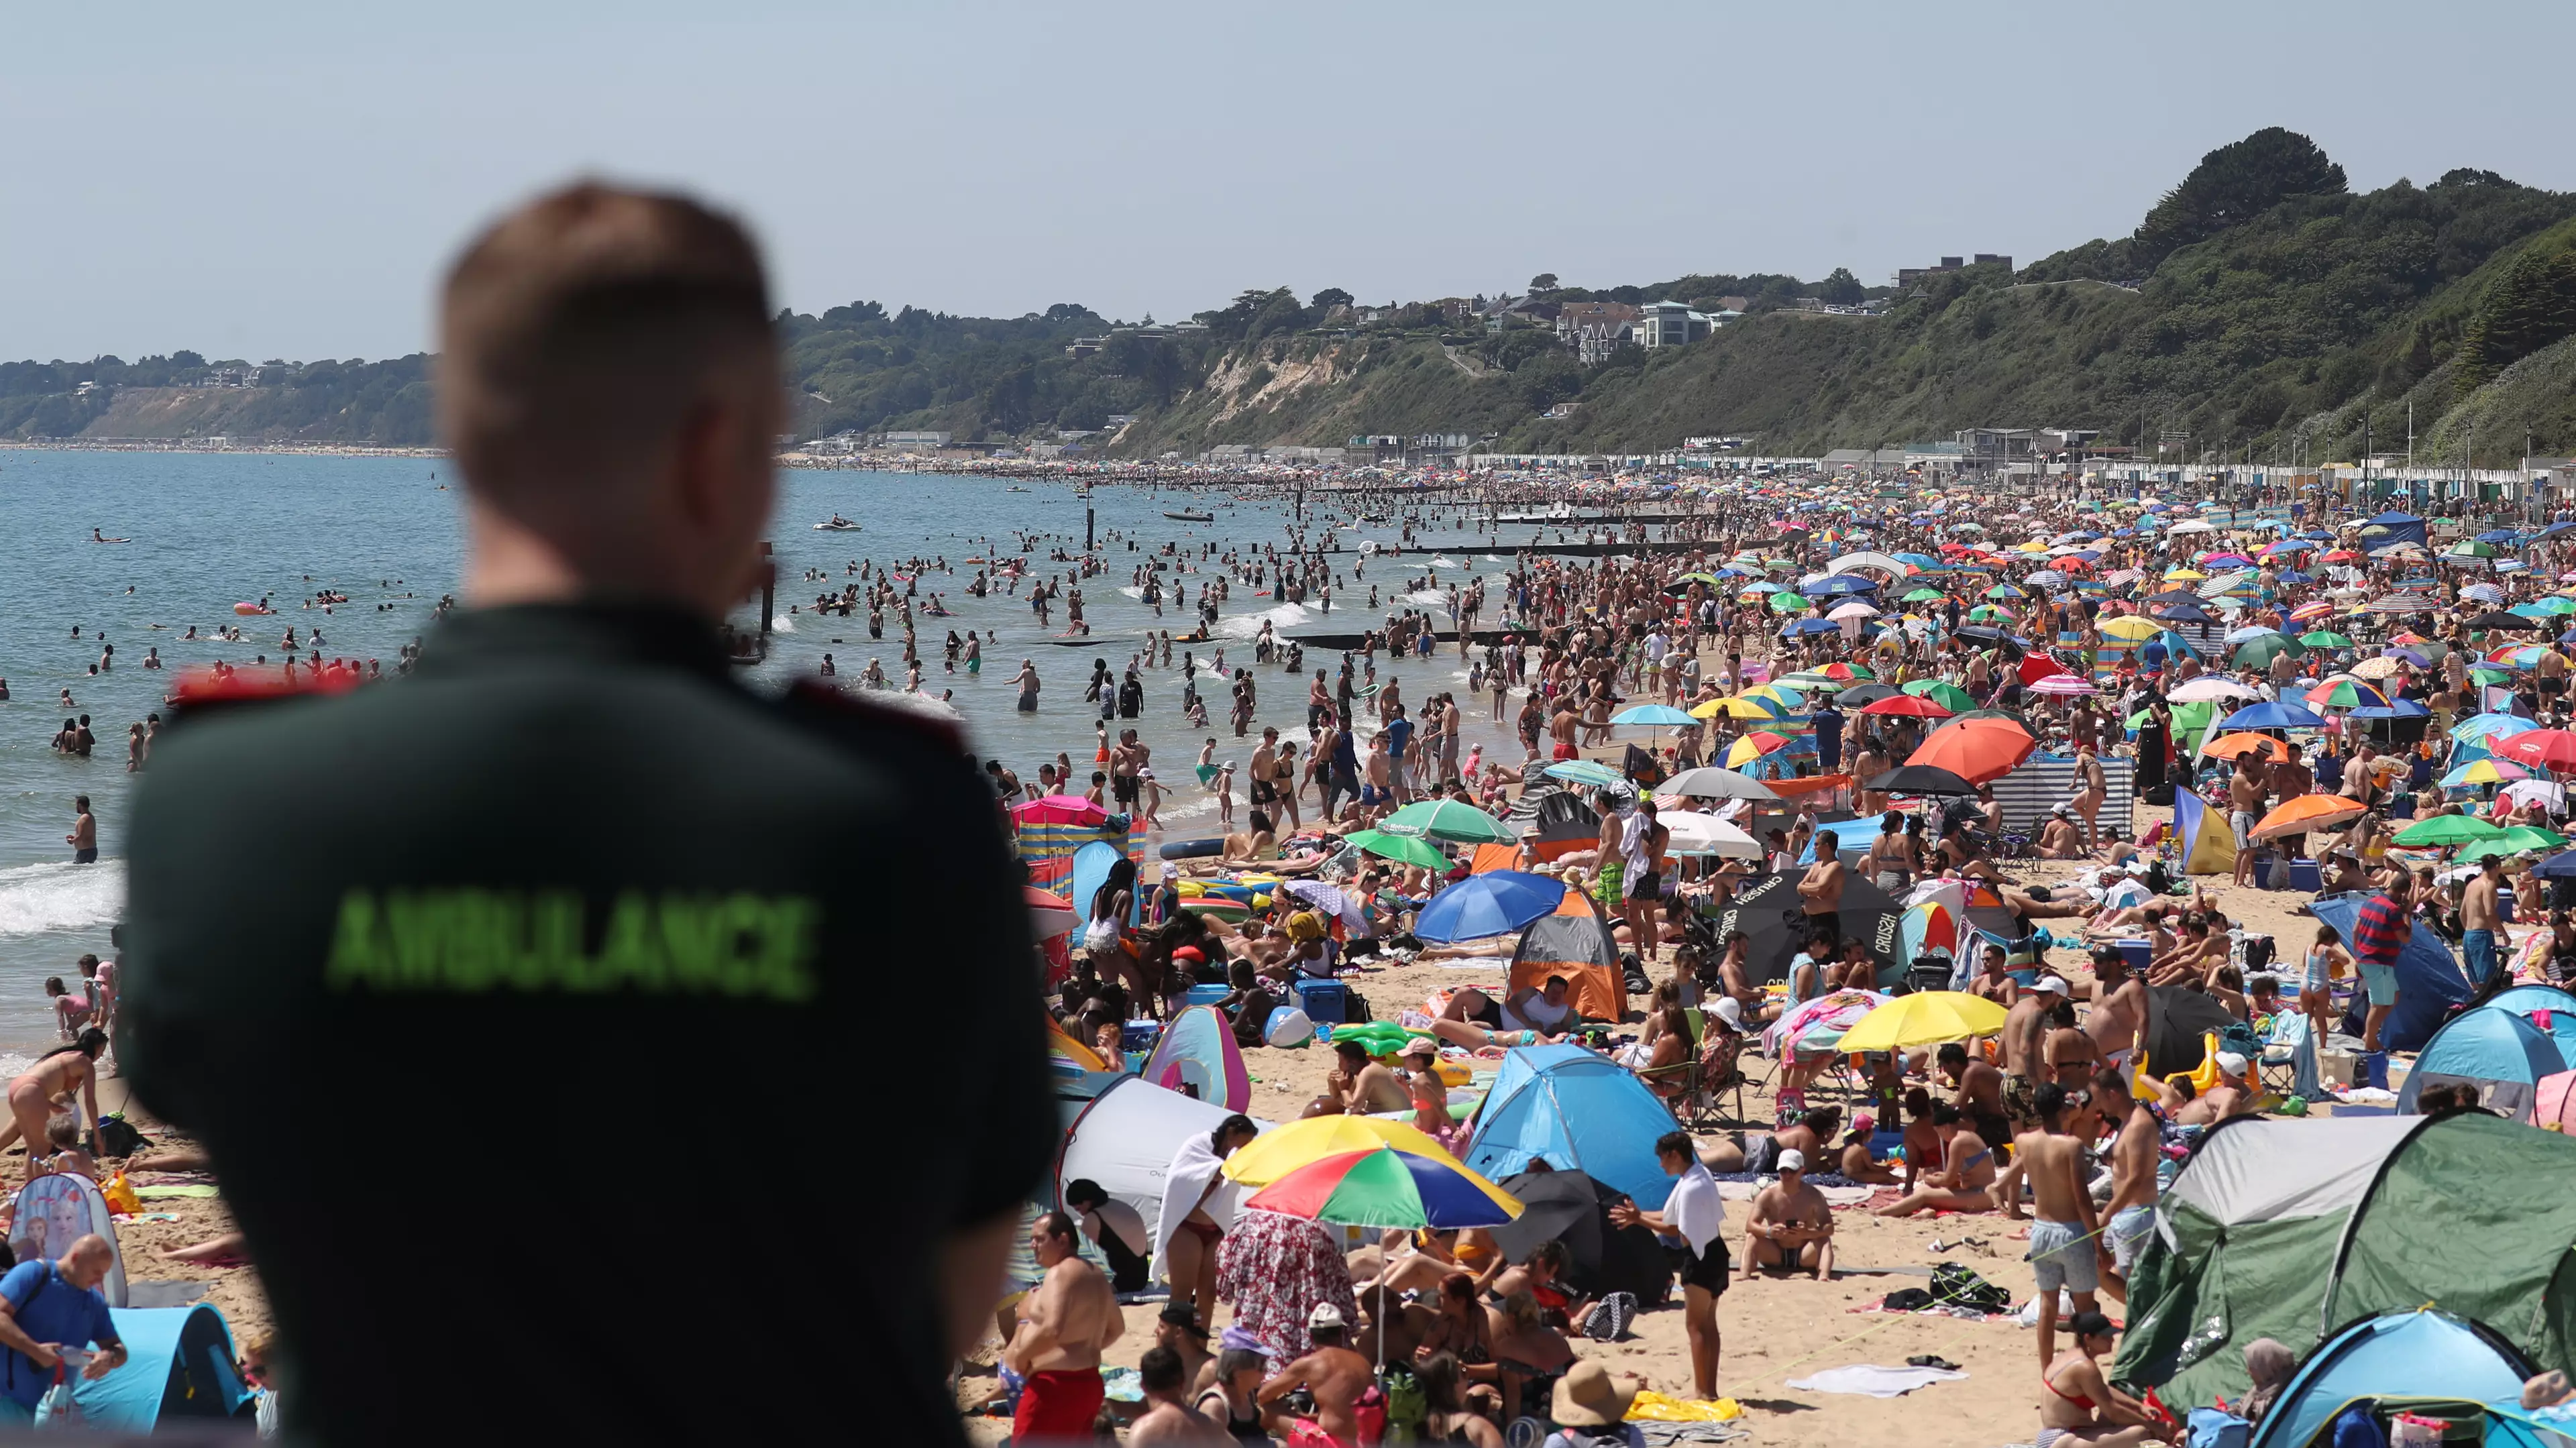 Major Incident Declared In Bournemouth As Thousands Flock To Beaches